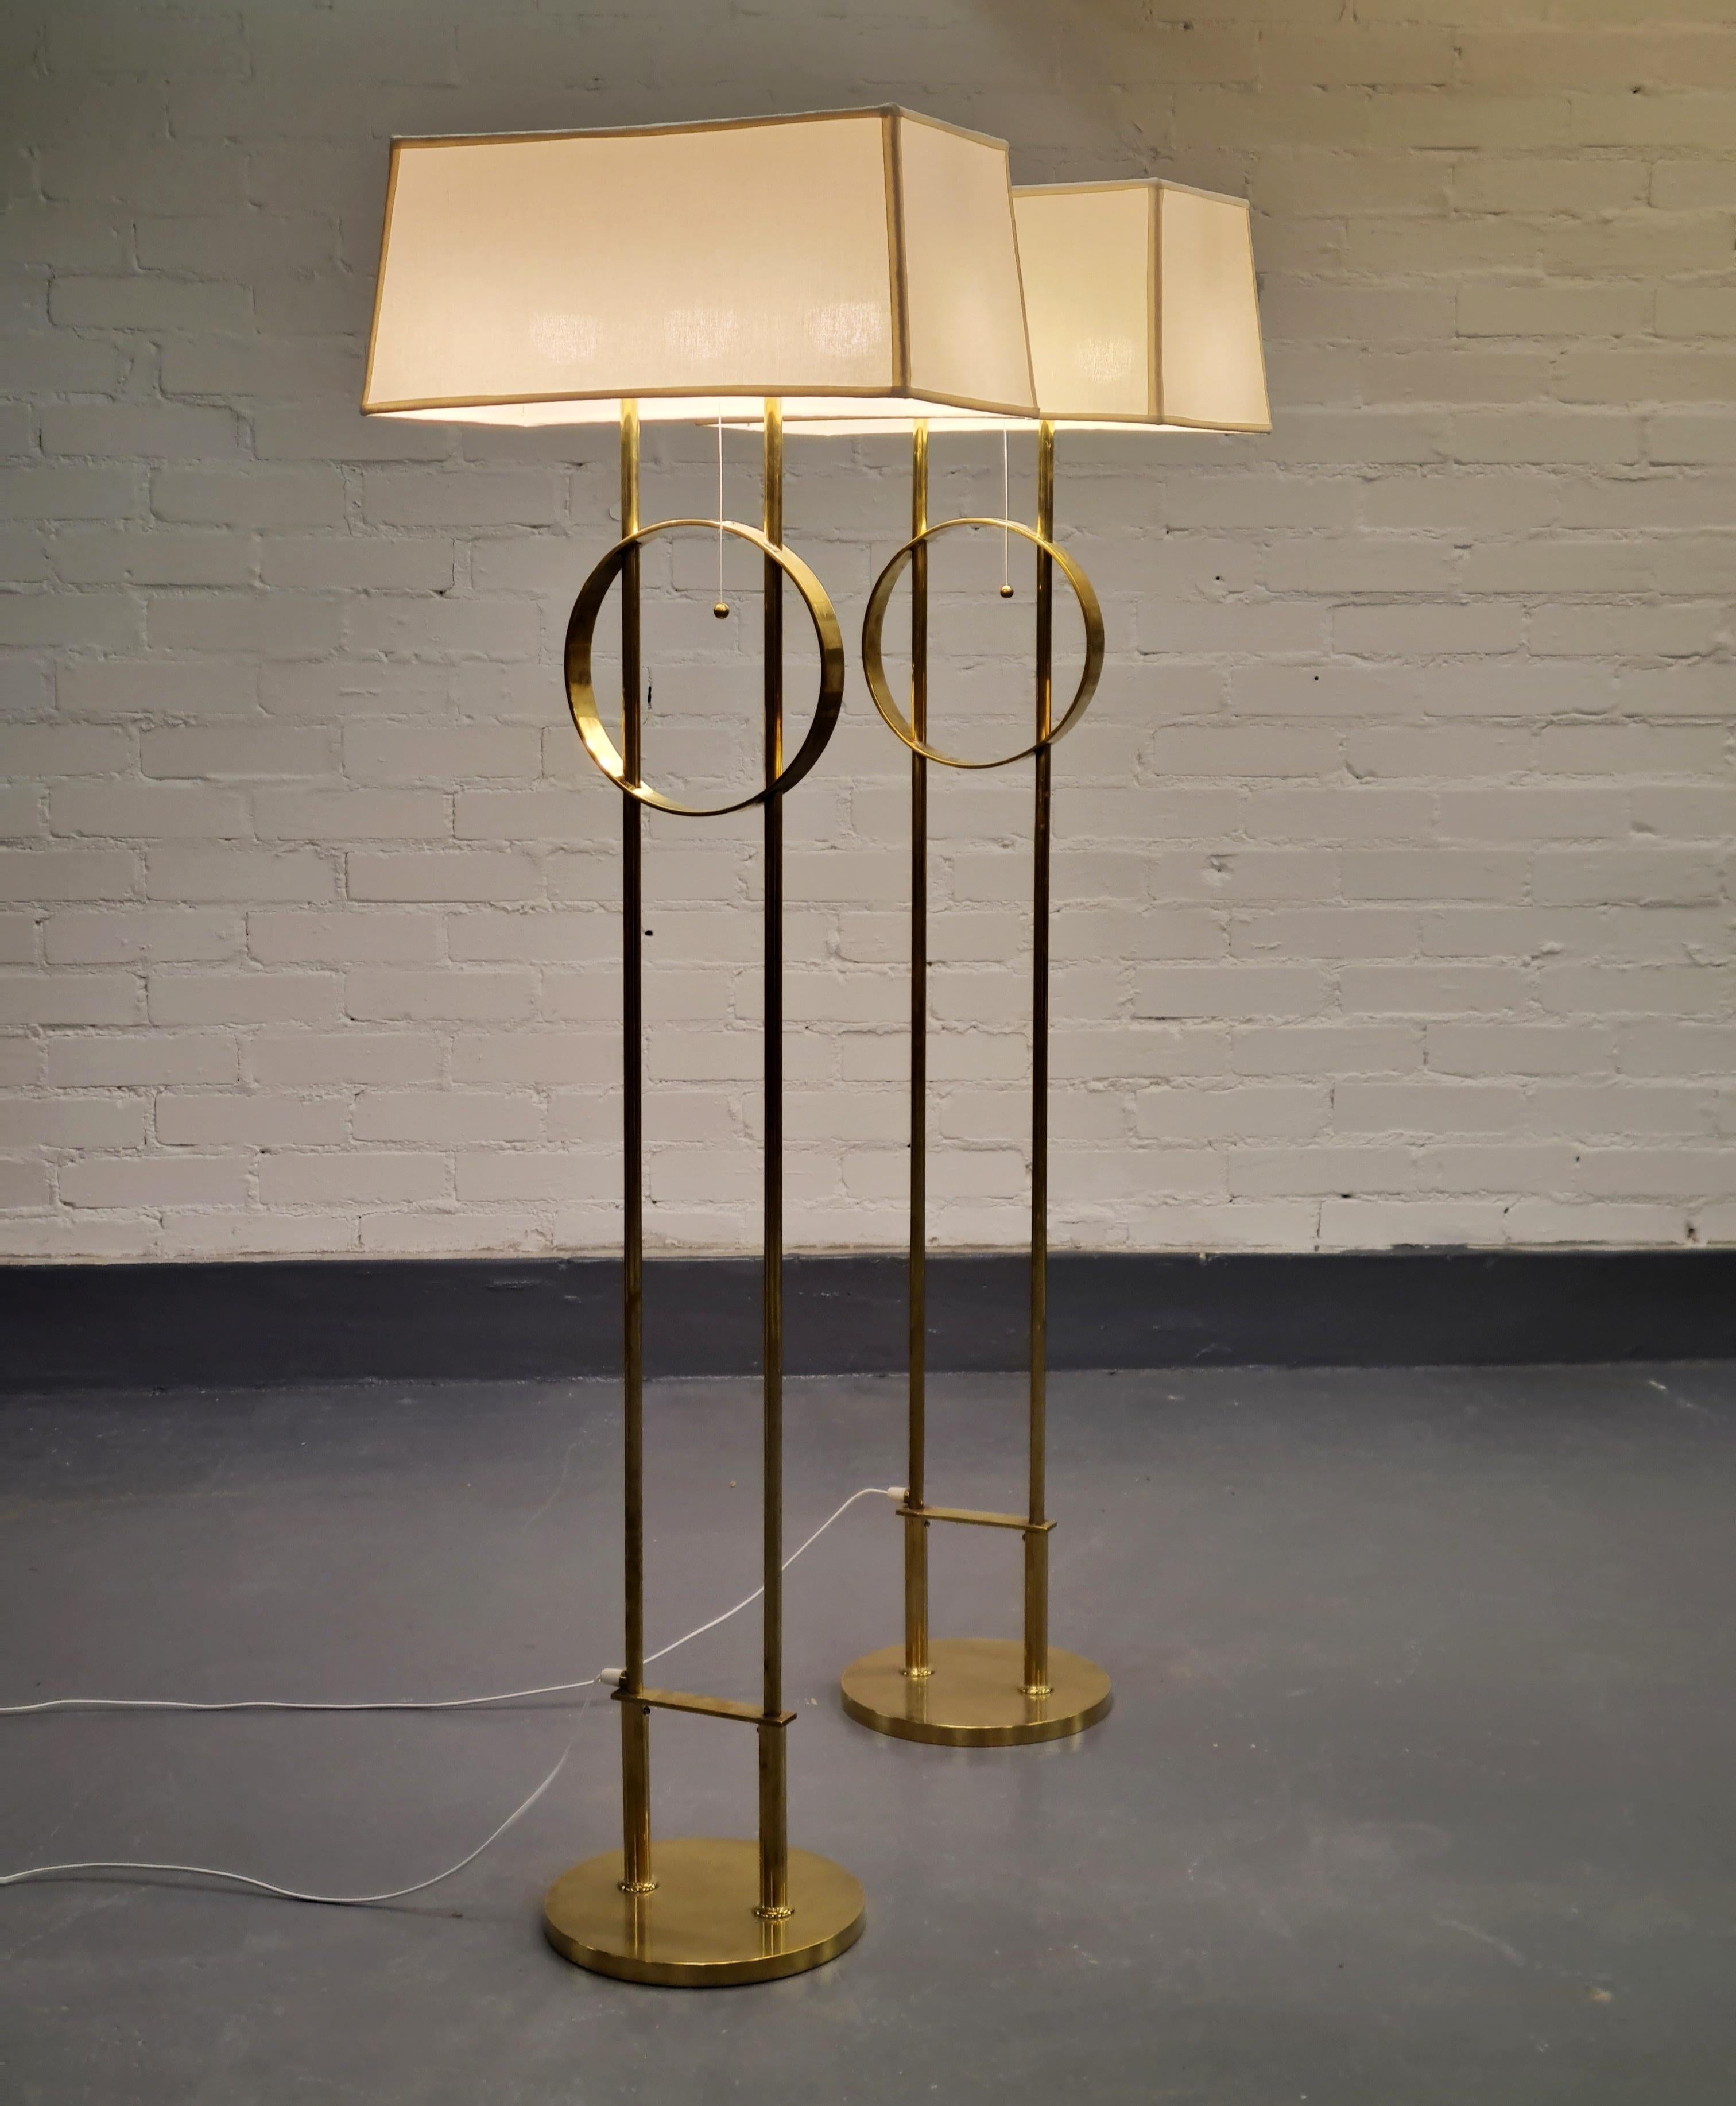 A Grand pair of Tynell floor lamps commissioned for the HOK Suurravintola 